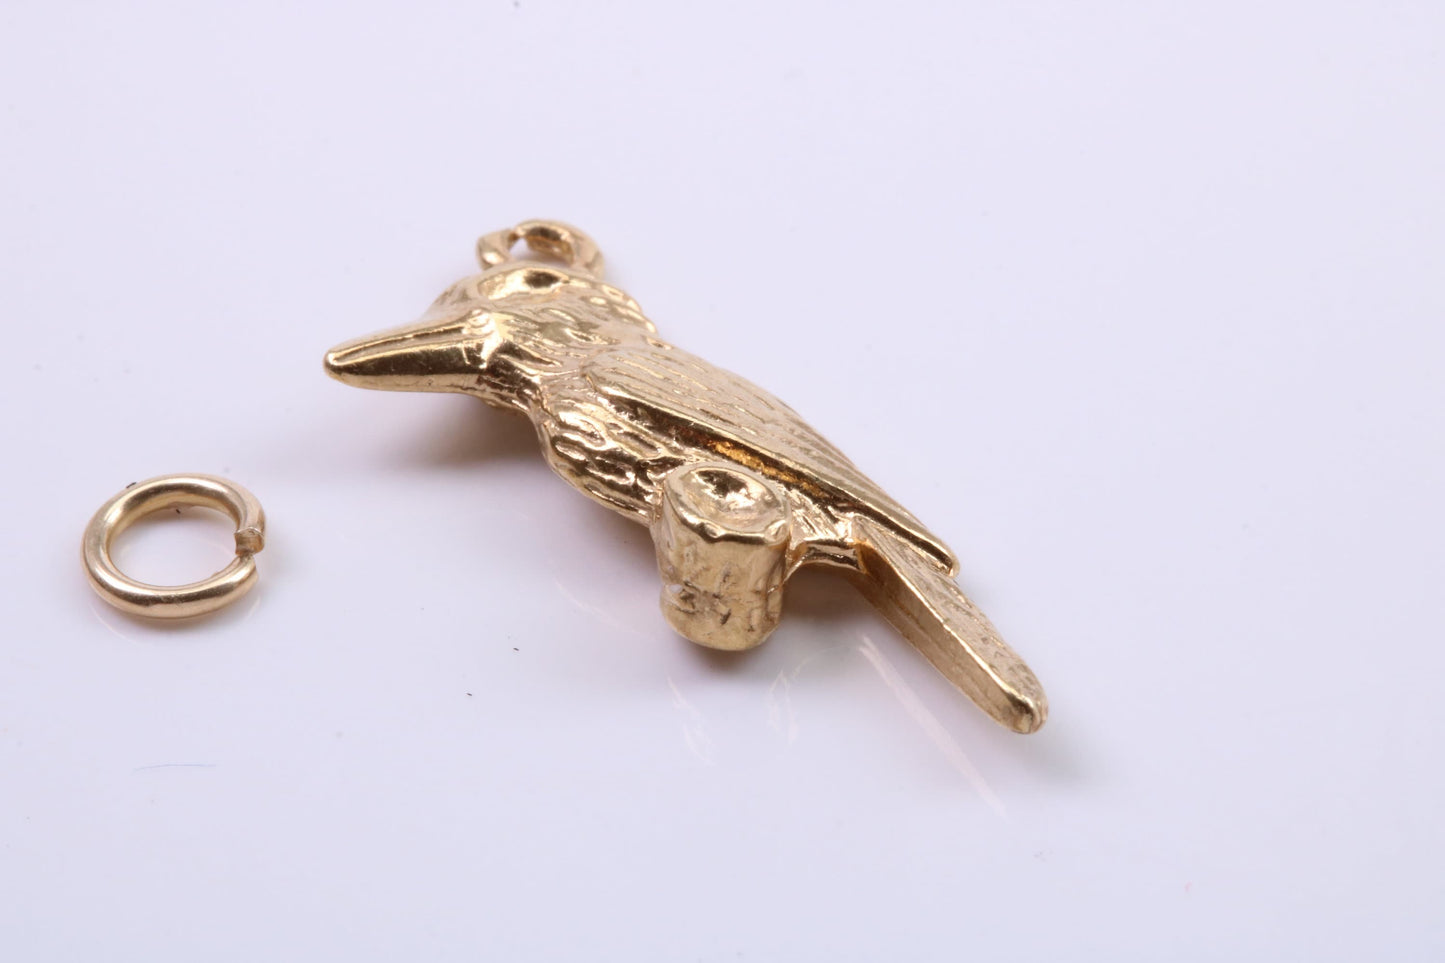 Raven Charm, Traditional Charm, Made from Solid 9ct Yellow Gold, British Hallmarked, Complete with Attachment Link